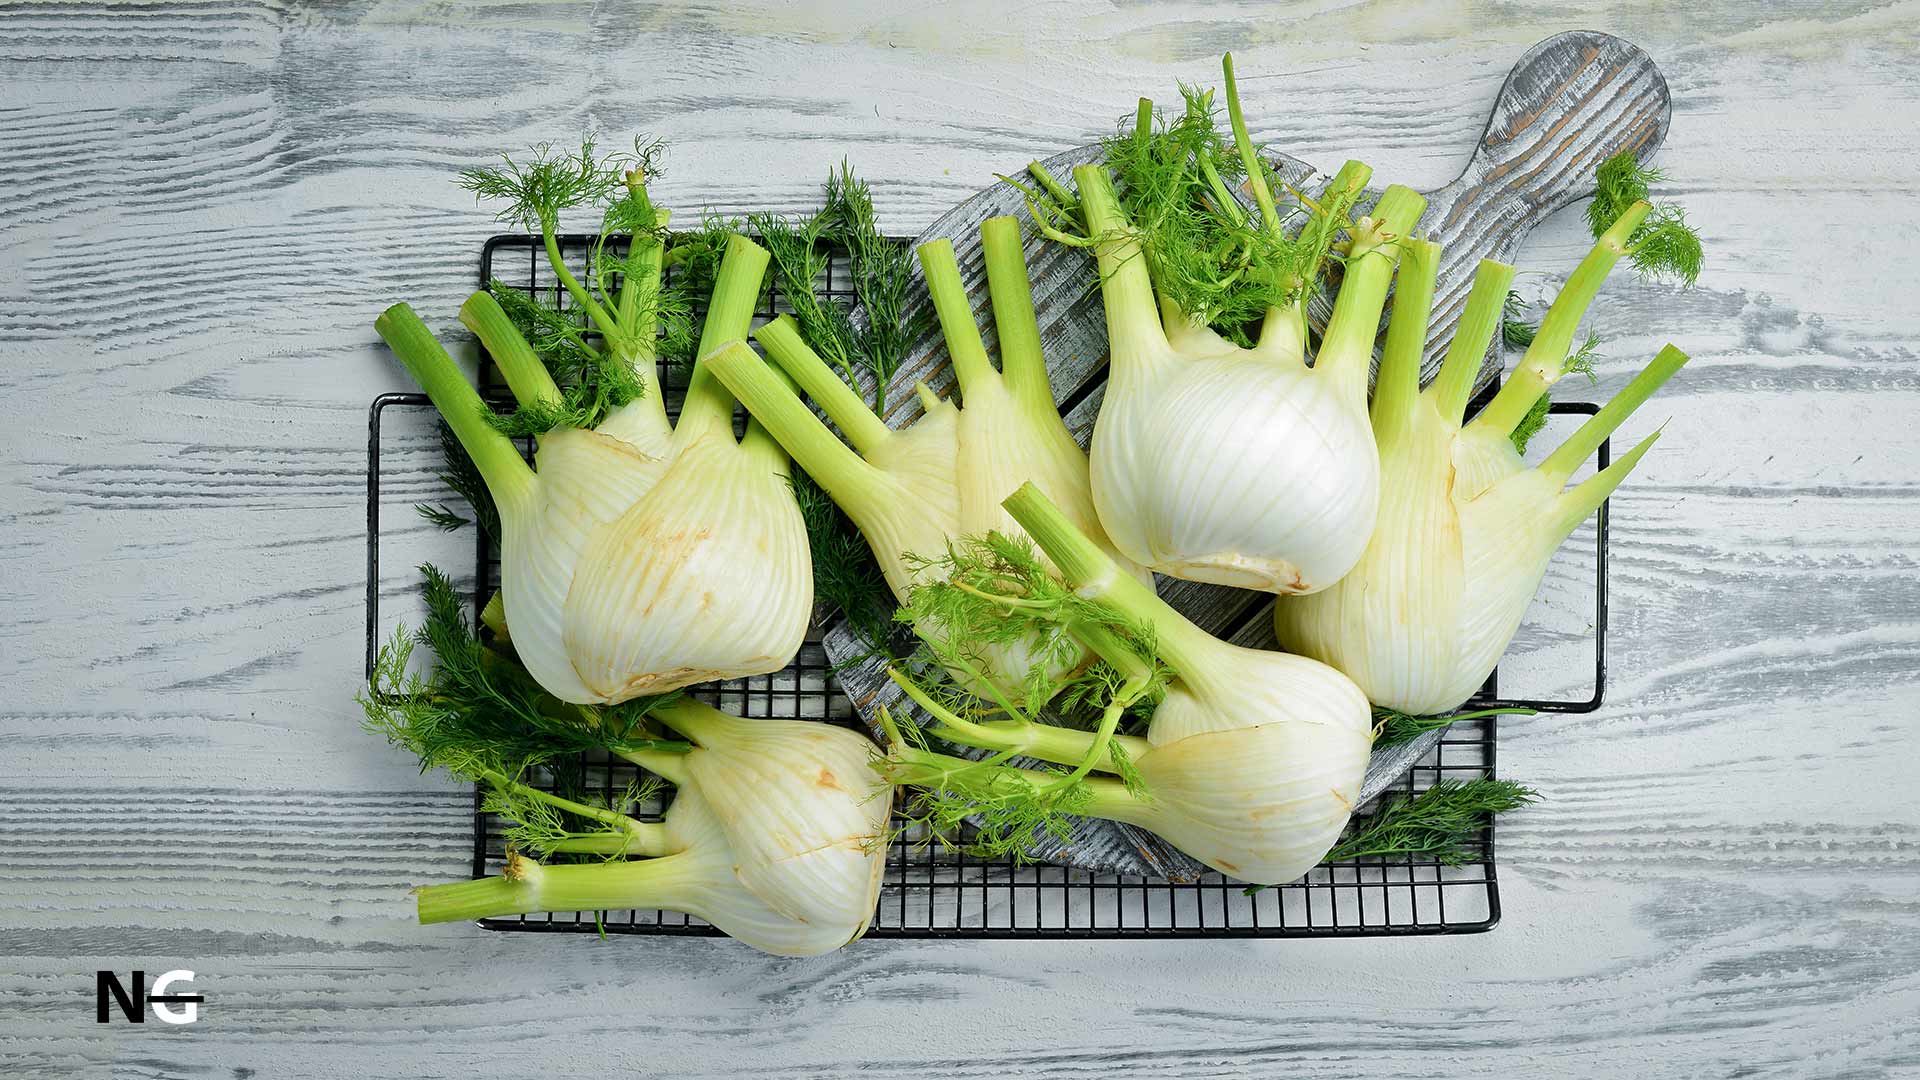 What is Fennel